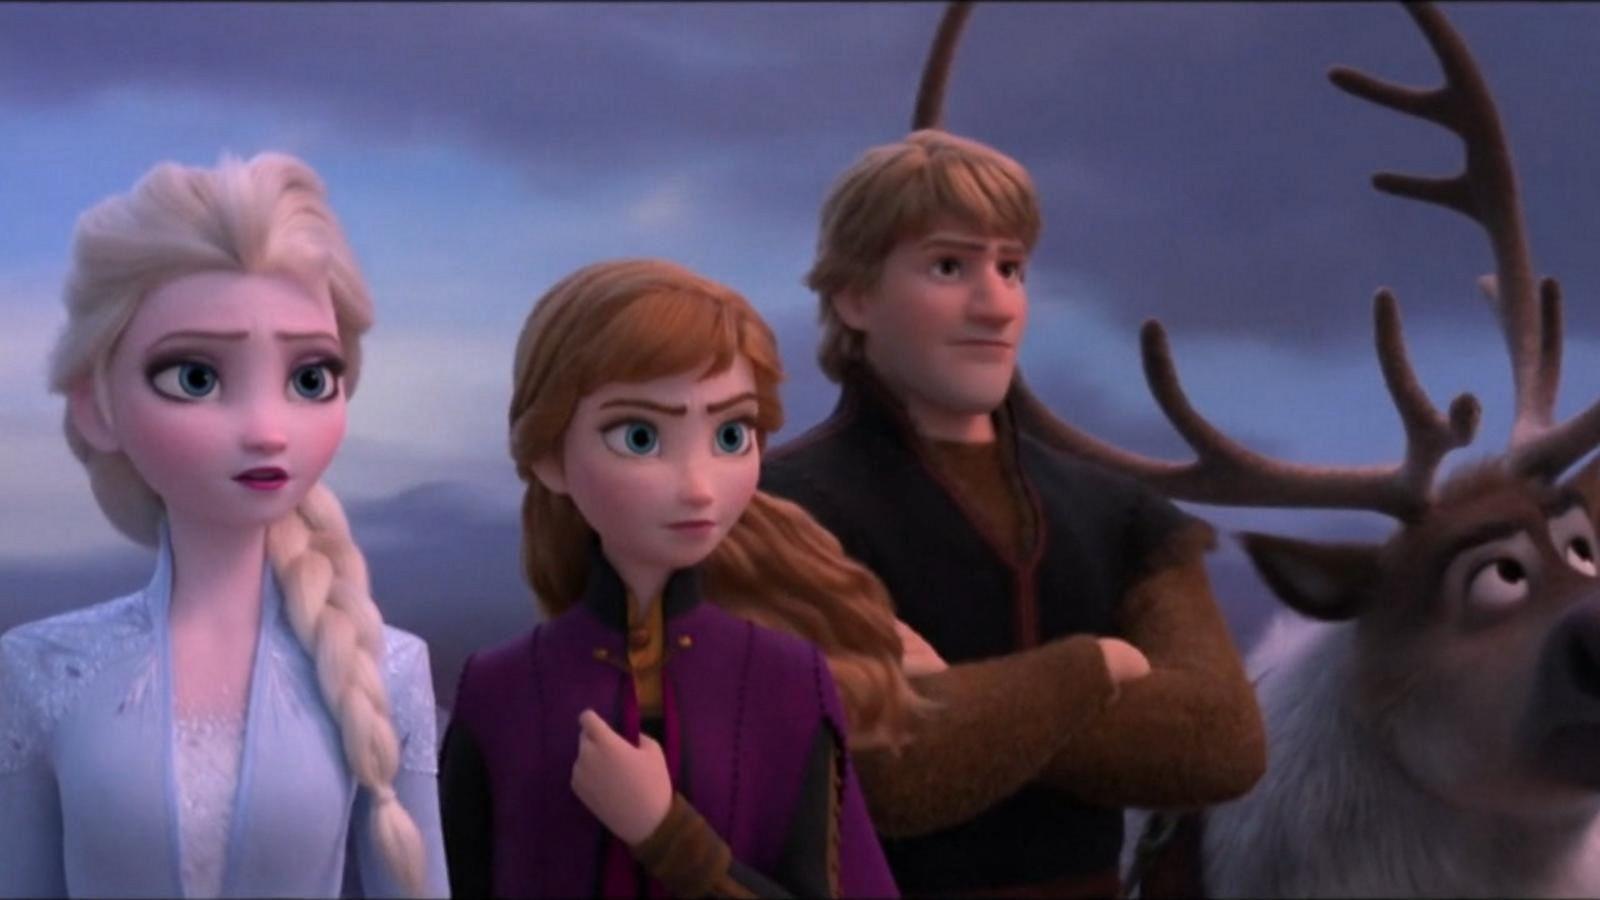 Anna, Elsa featured in mysterious movie poster for 'Frozen 2'